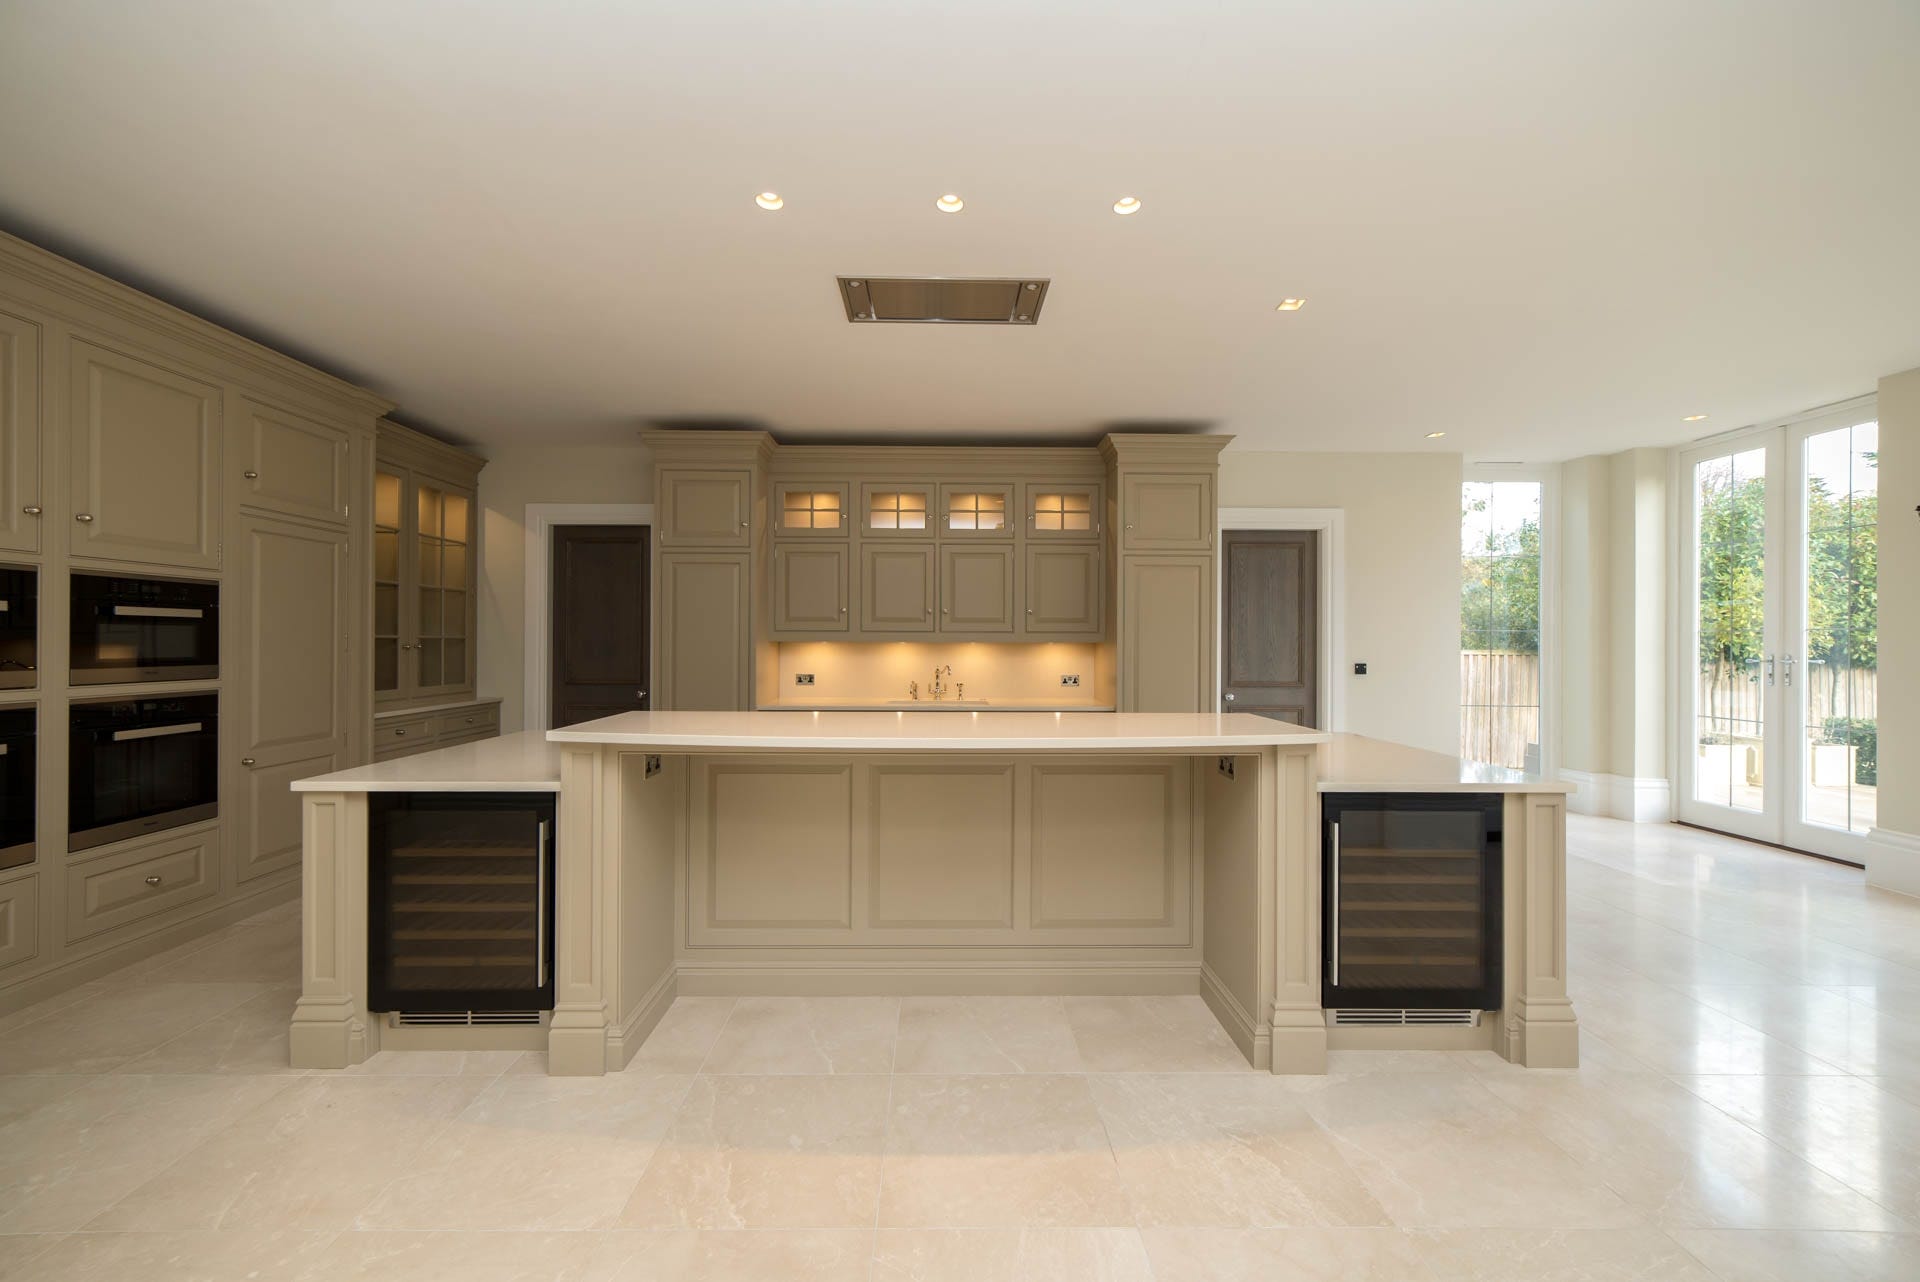 Large Tom Howley Kitchen